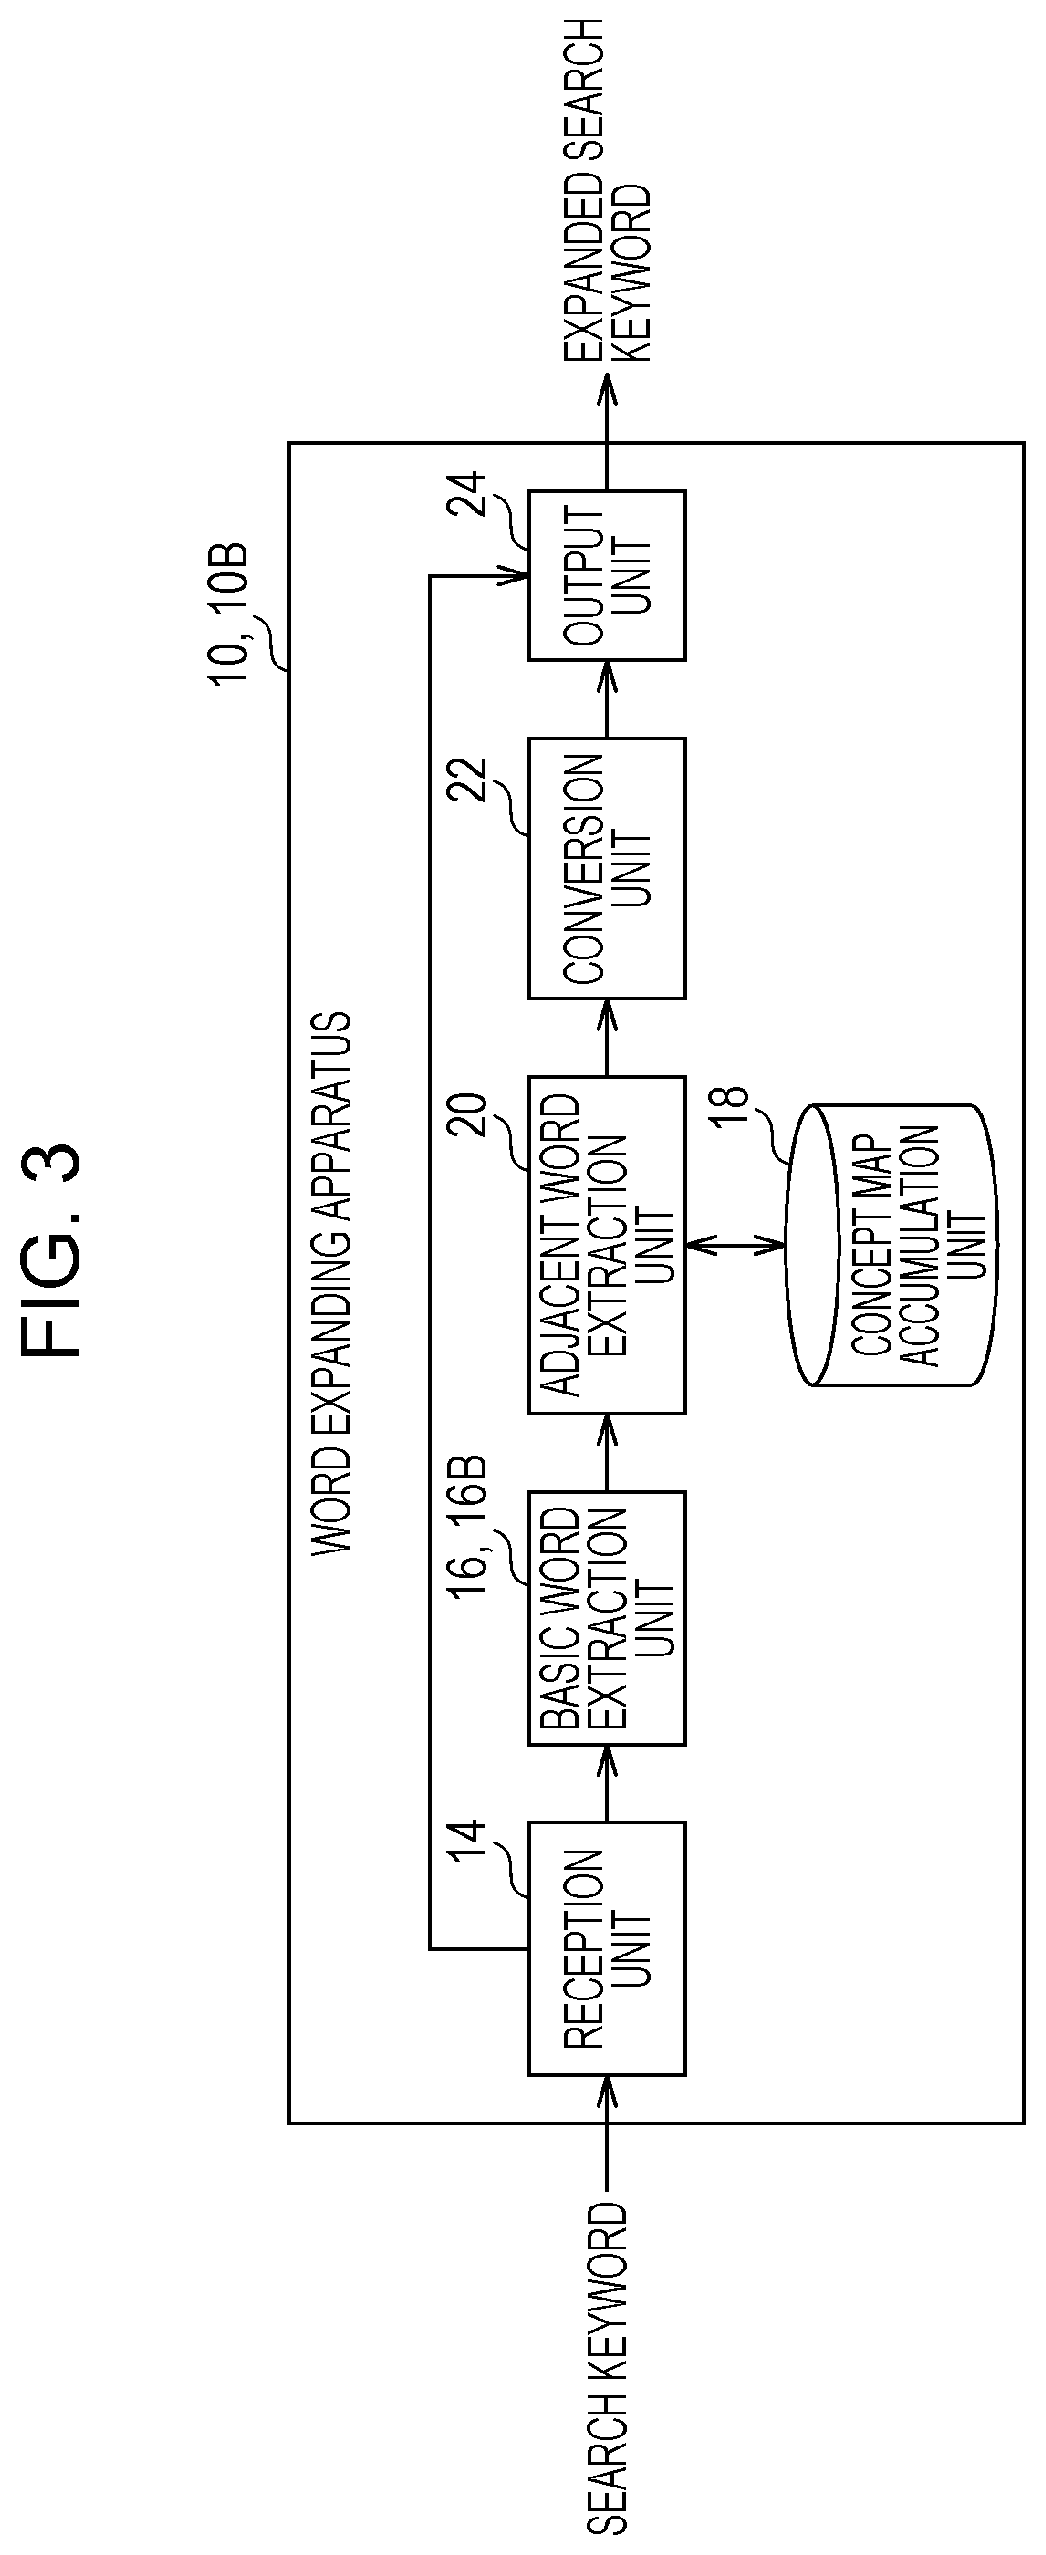 Method for expanding word, word expanding apparatus, and non-transitory computer-readable recording medium